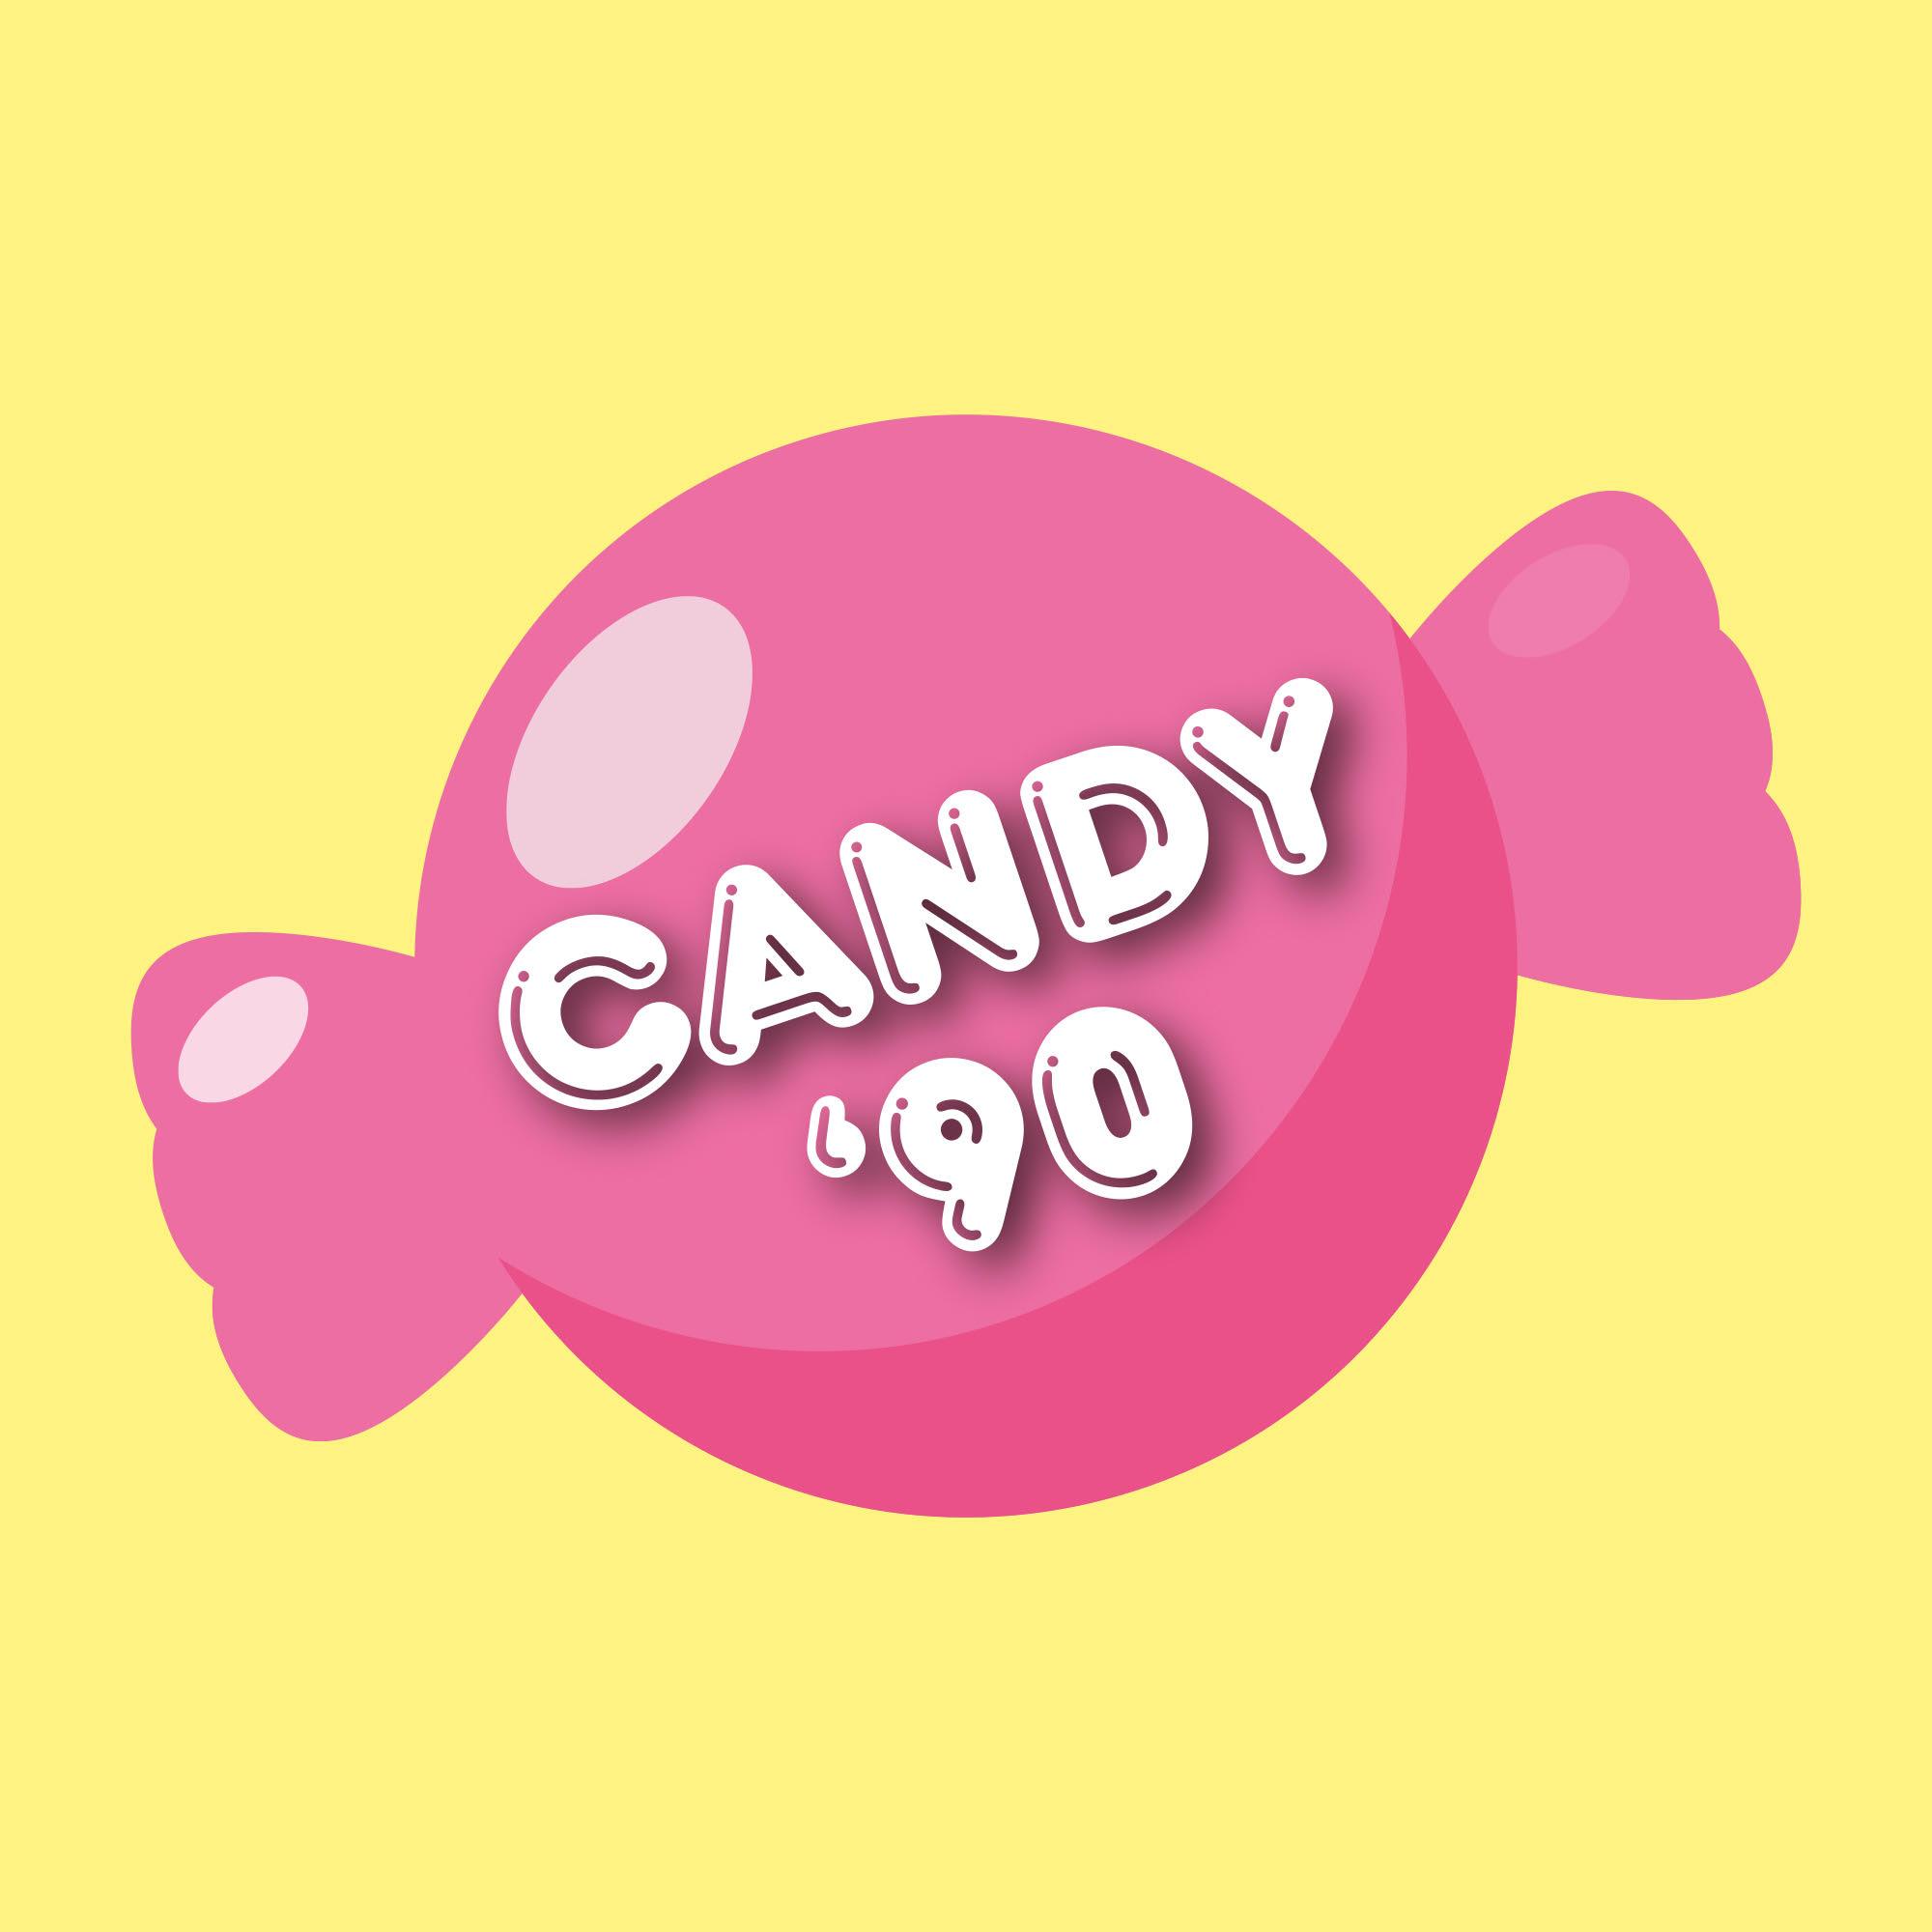 90candy